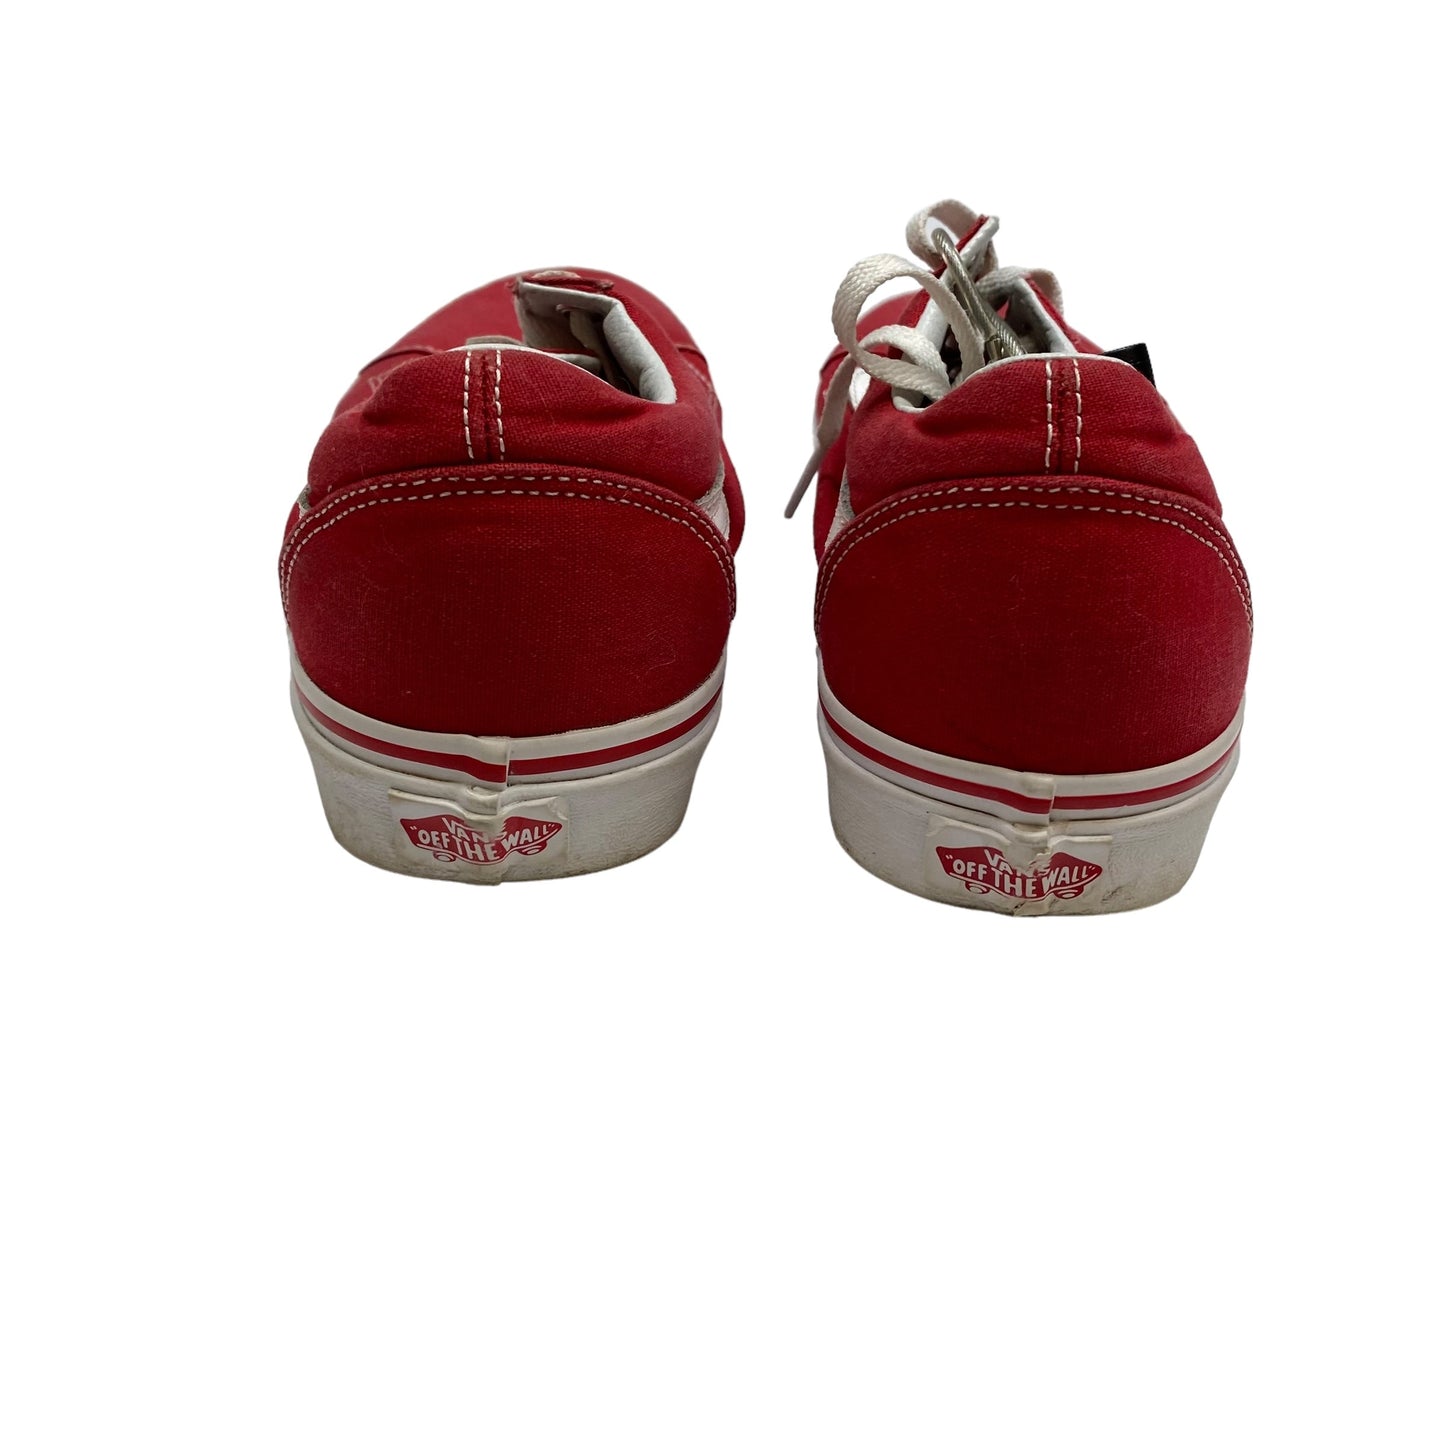 Red Shoes Sneakers Vans, Size 10